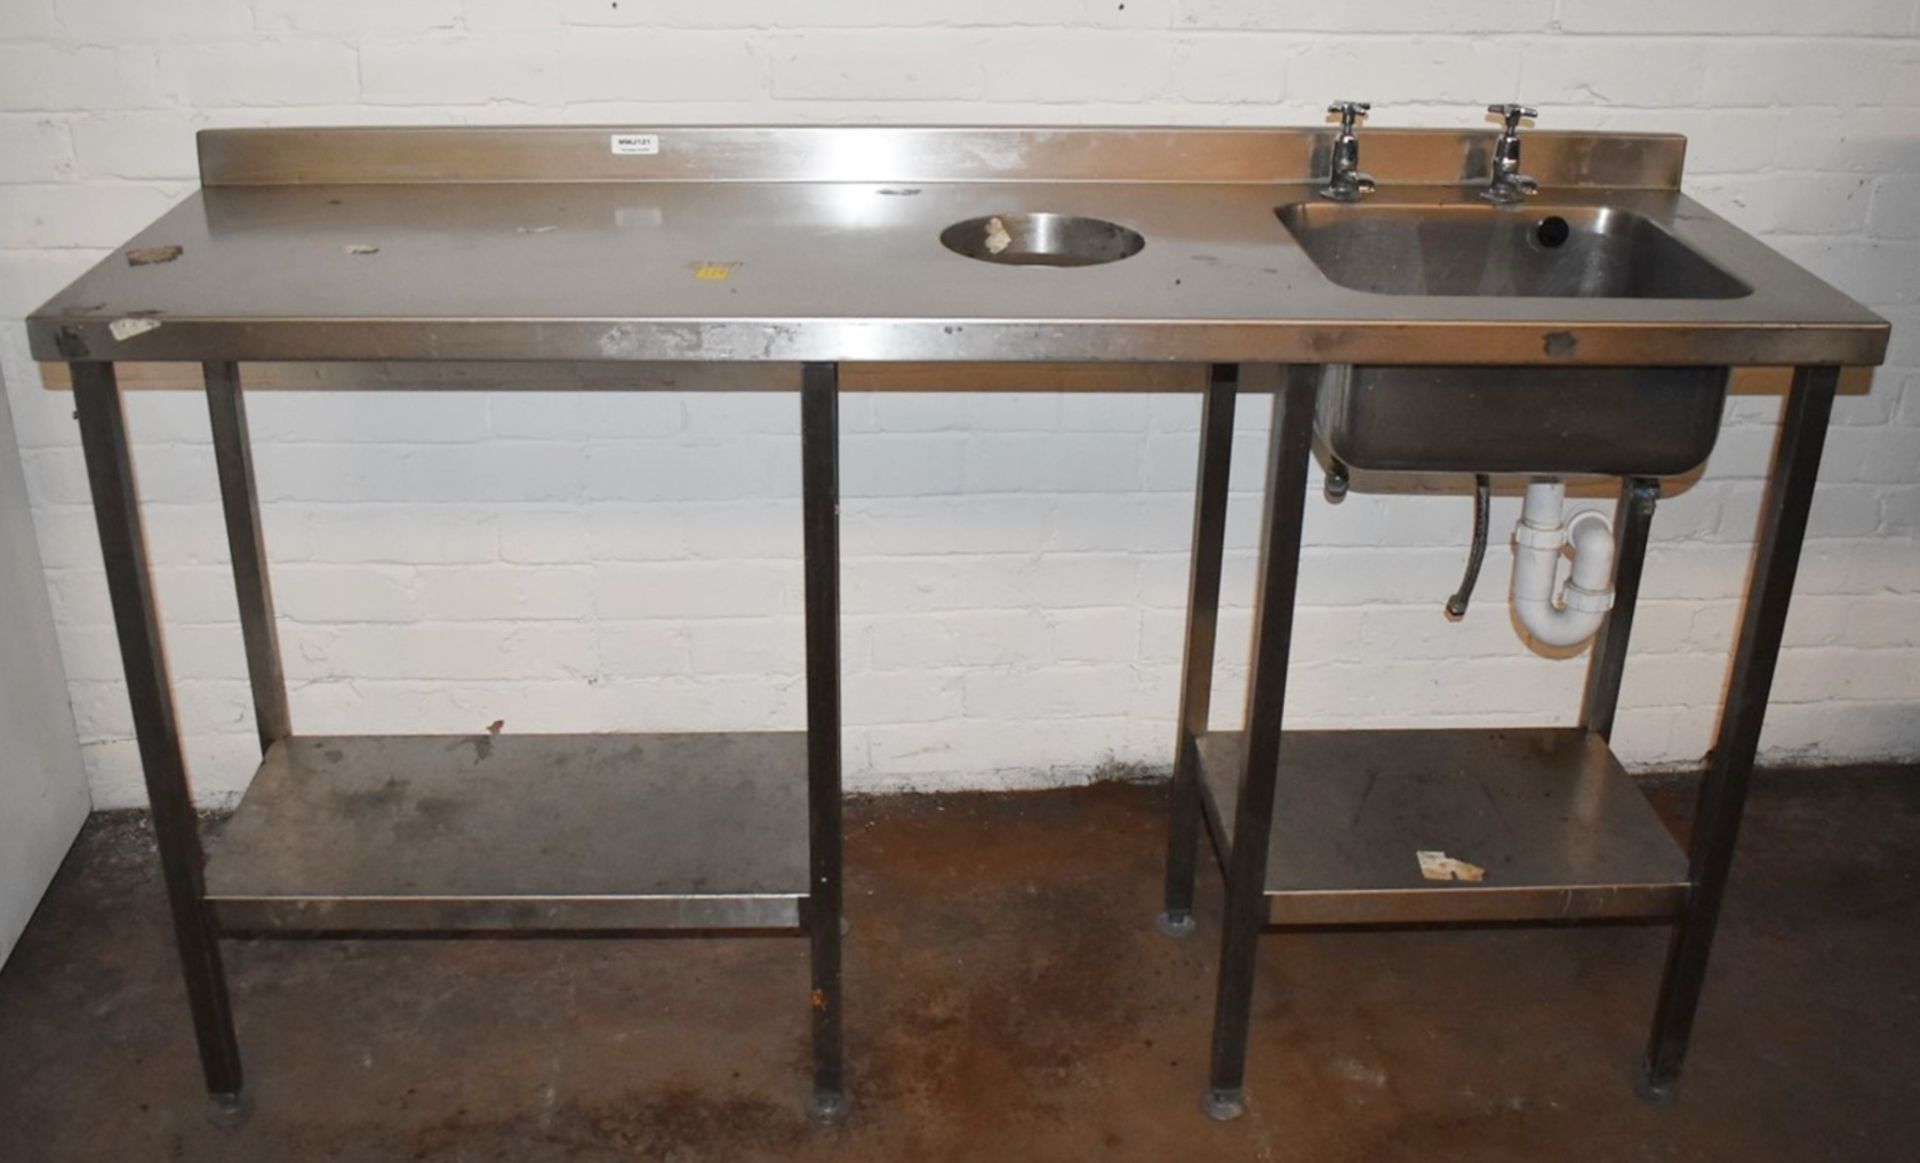 1 x Stainless Steel Sink Unt Featuring Single Wash Bowl, Taps, Prep Area and Central Waste Bin Chute